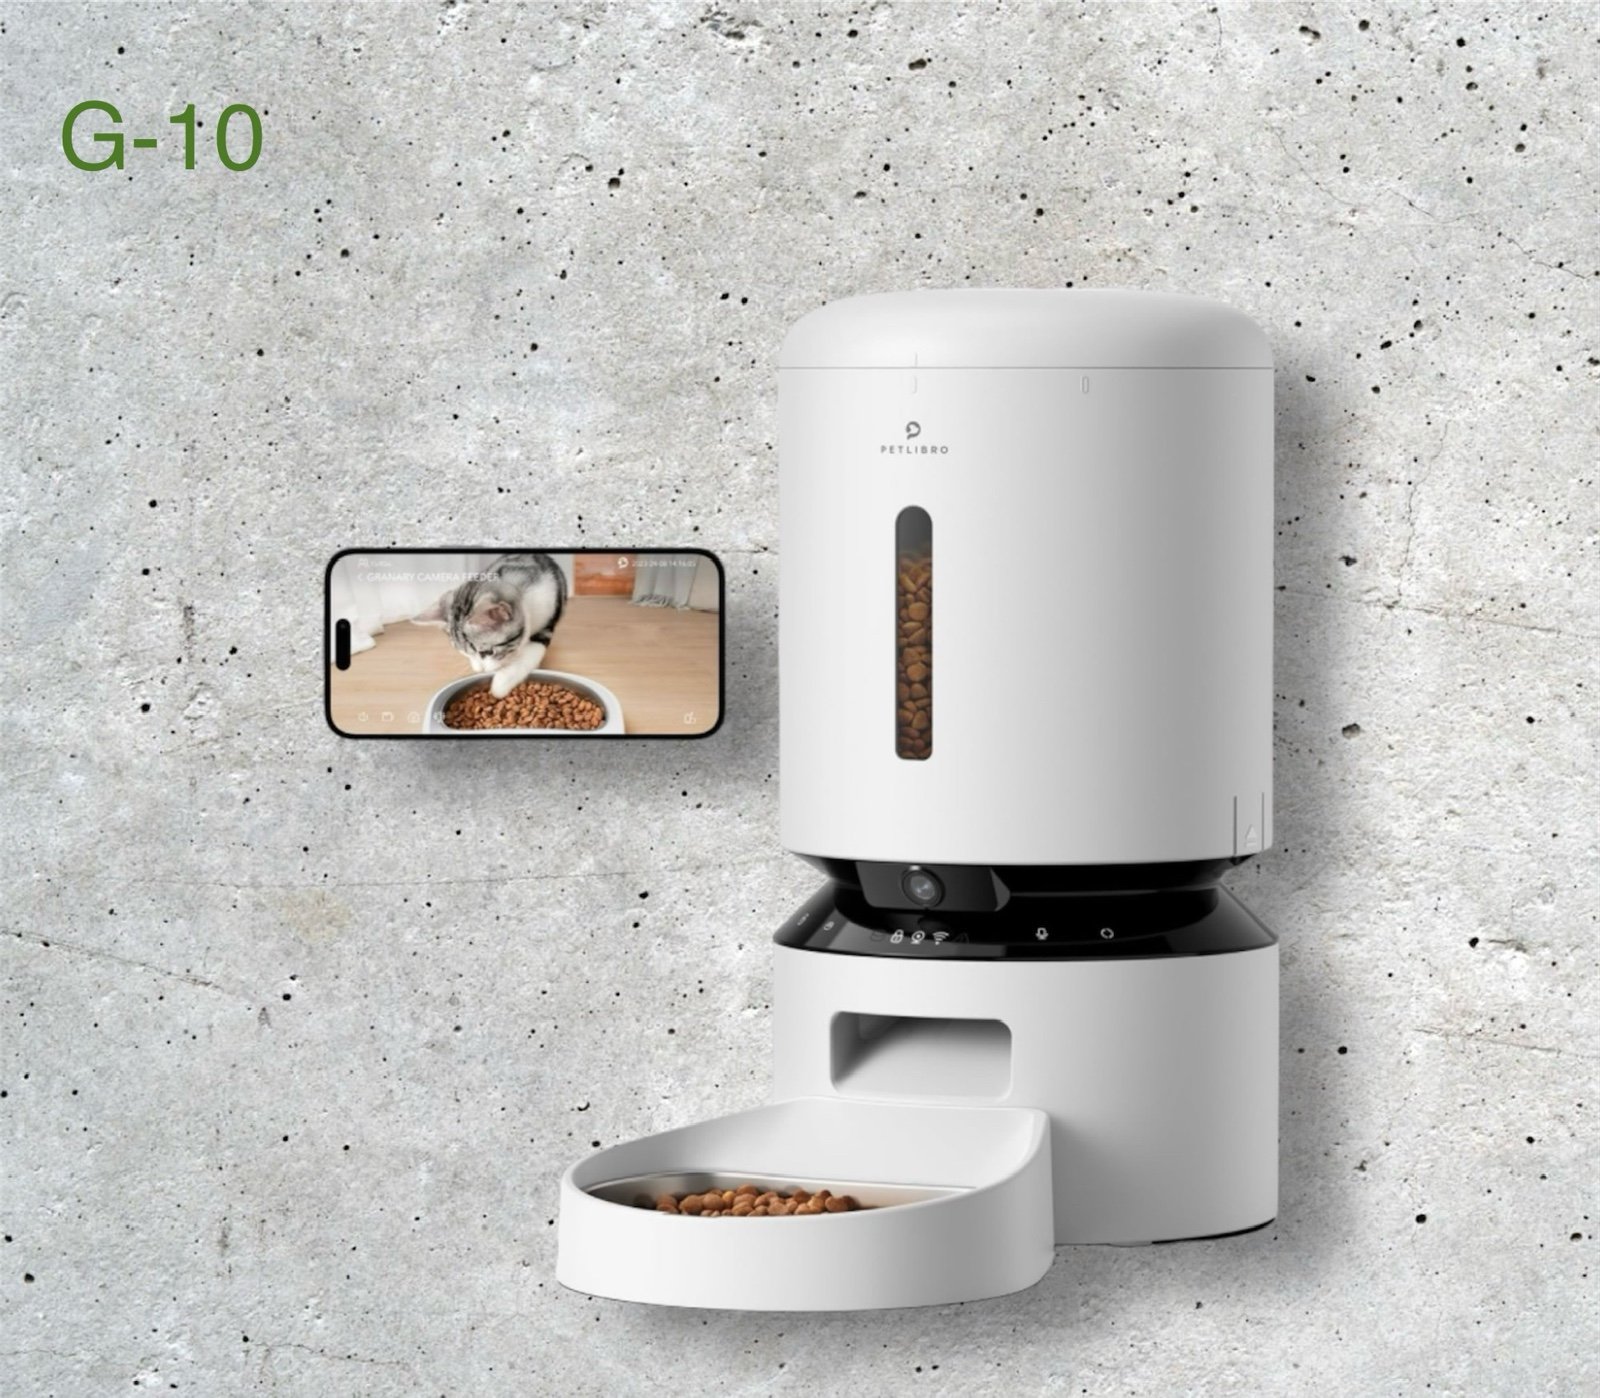 Automatic Cat Feeder with Camera, 1080P HD Video with Night Vision, 5G WiFi cabszWWN8